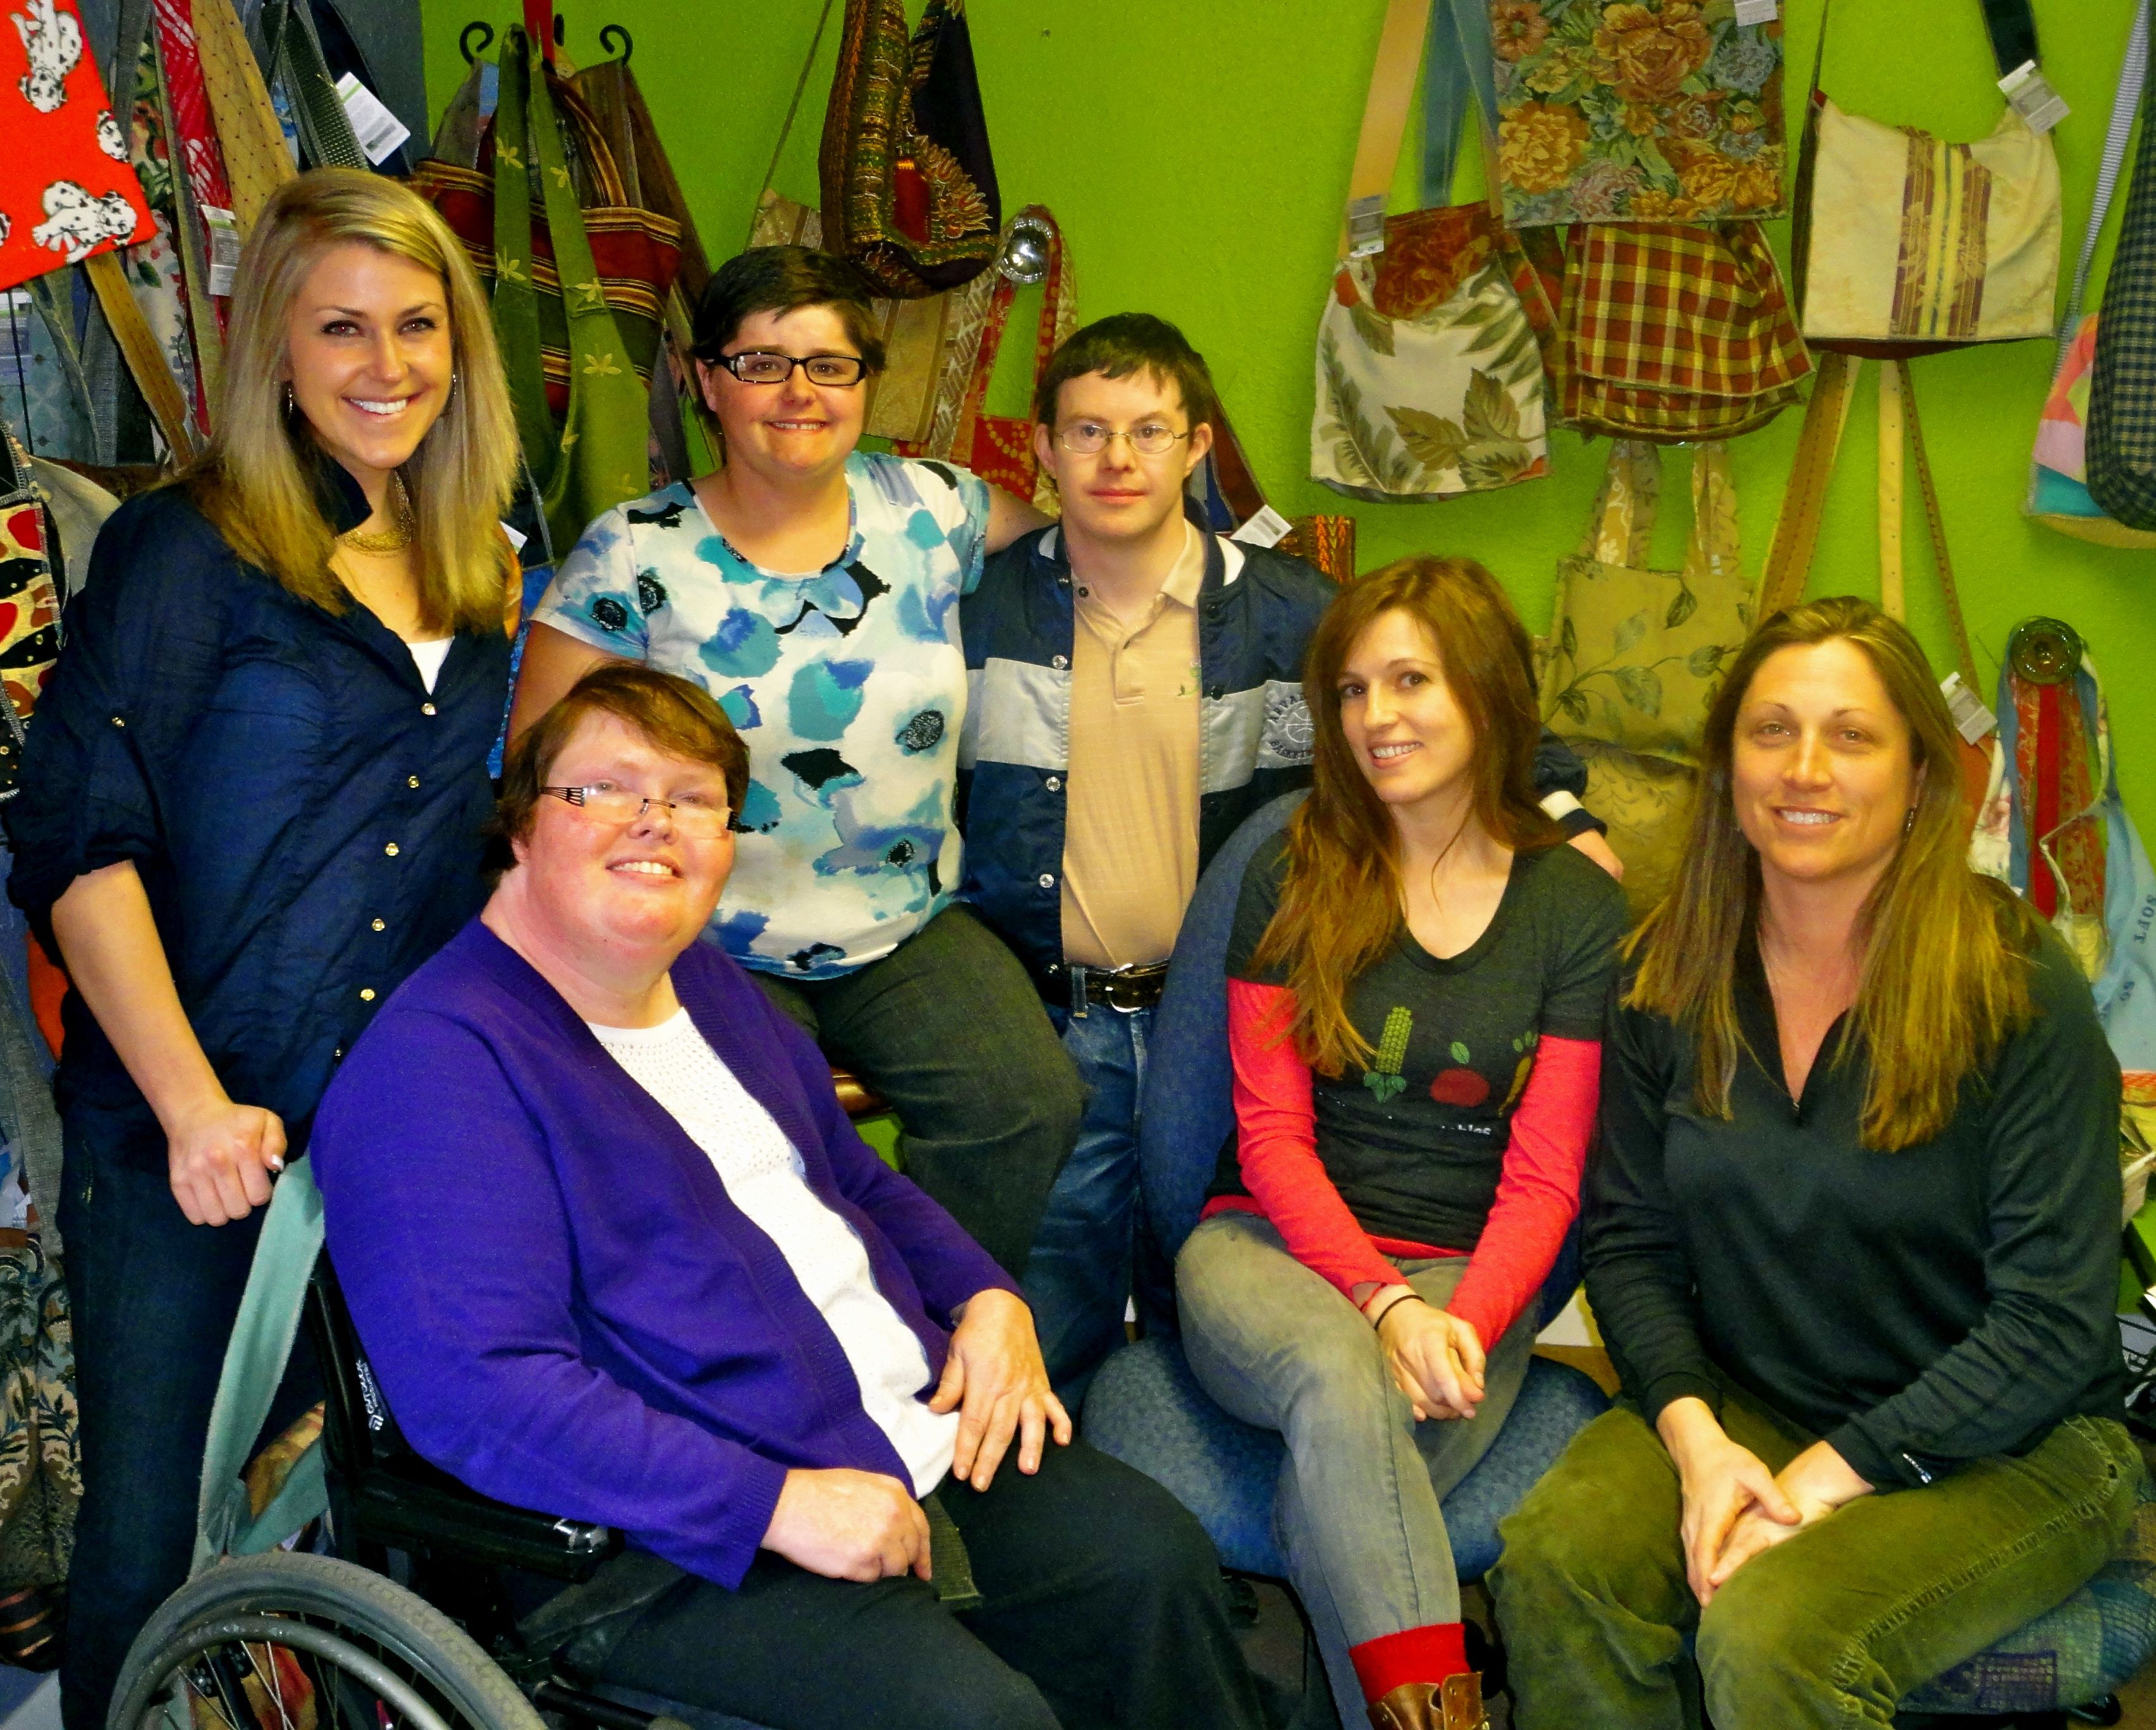 SustainAbility hires people with developmental disabilities.